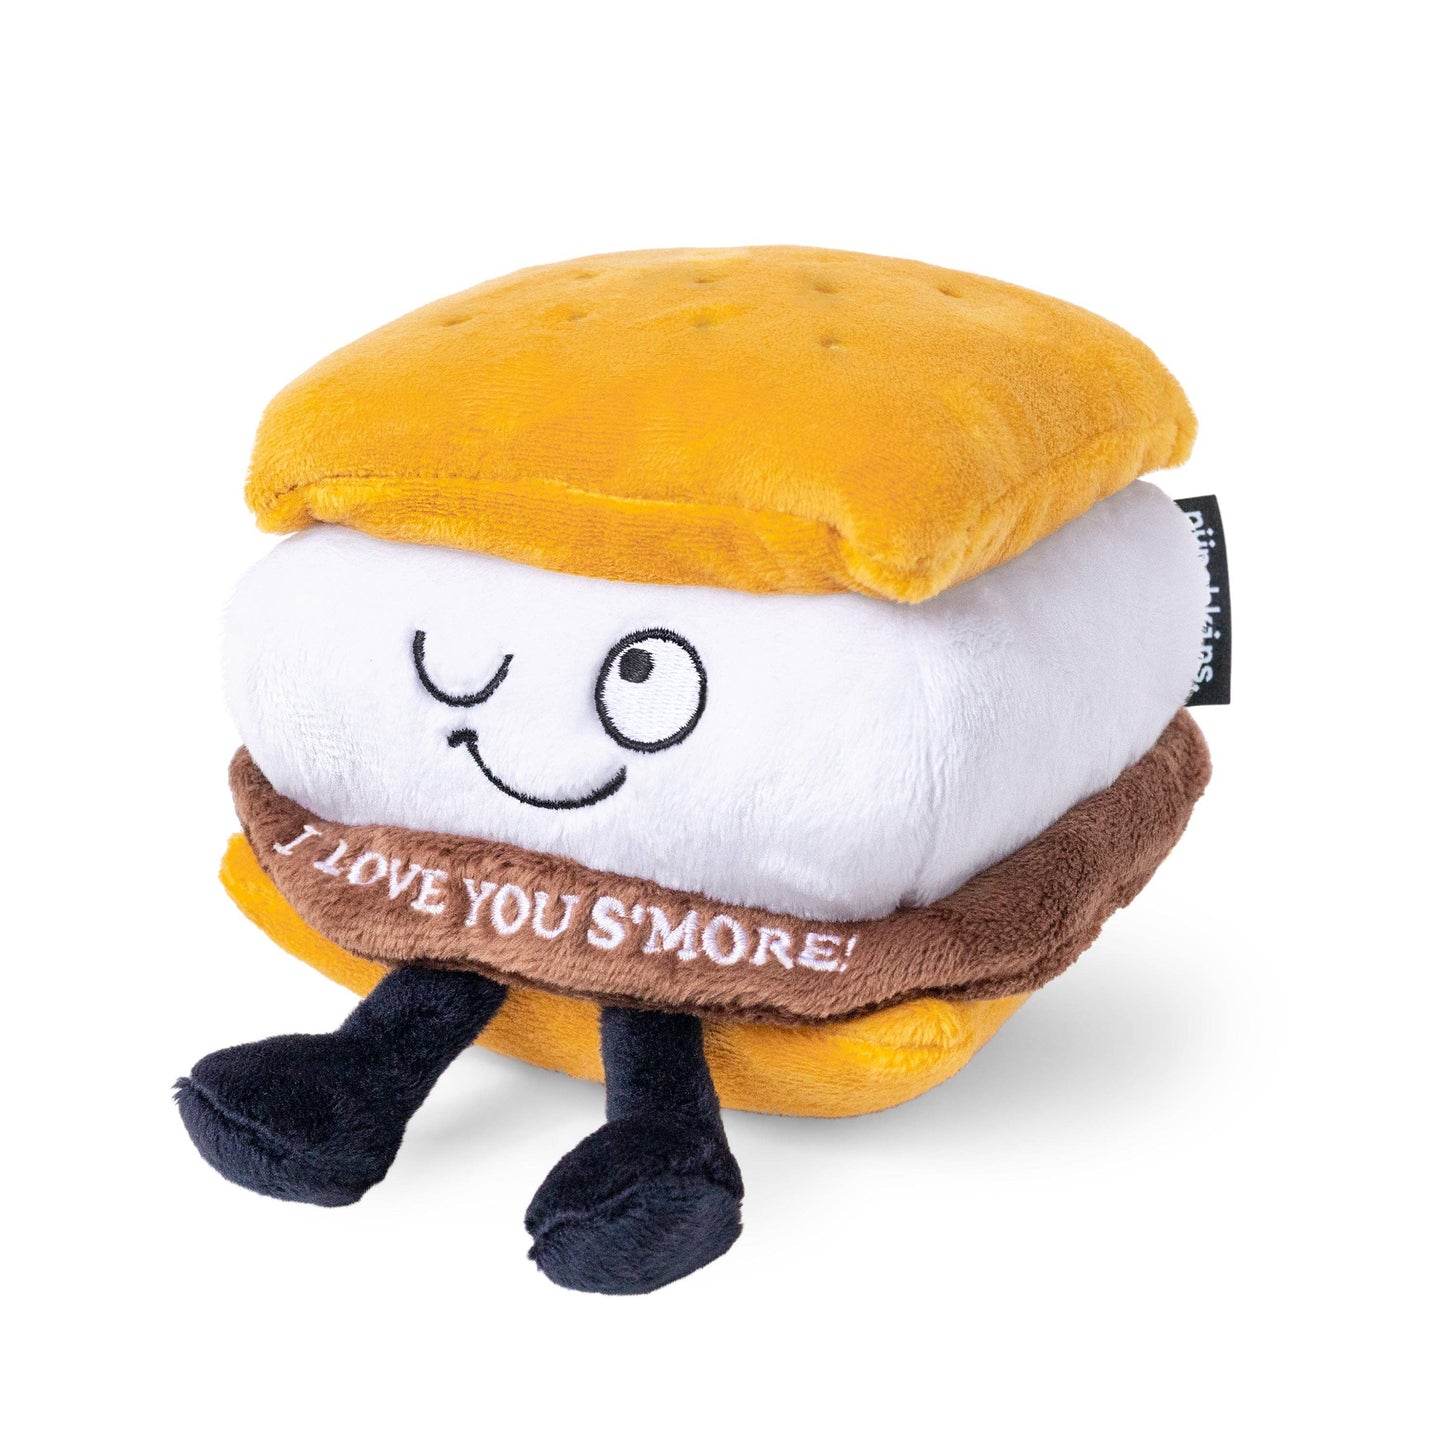 S'more plushie that has a winky face and reads "I Love You S'more!"